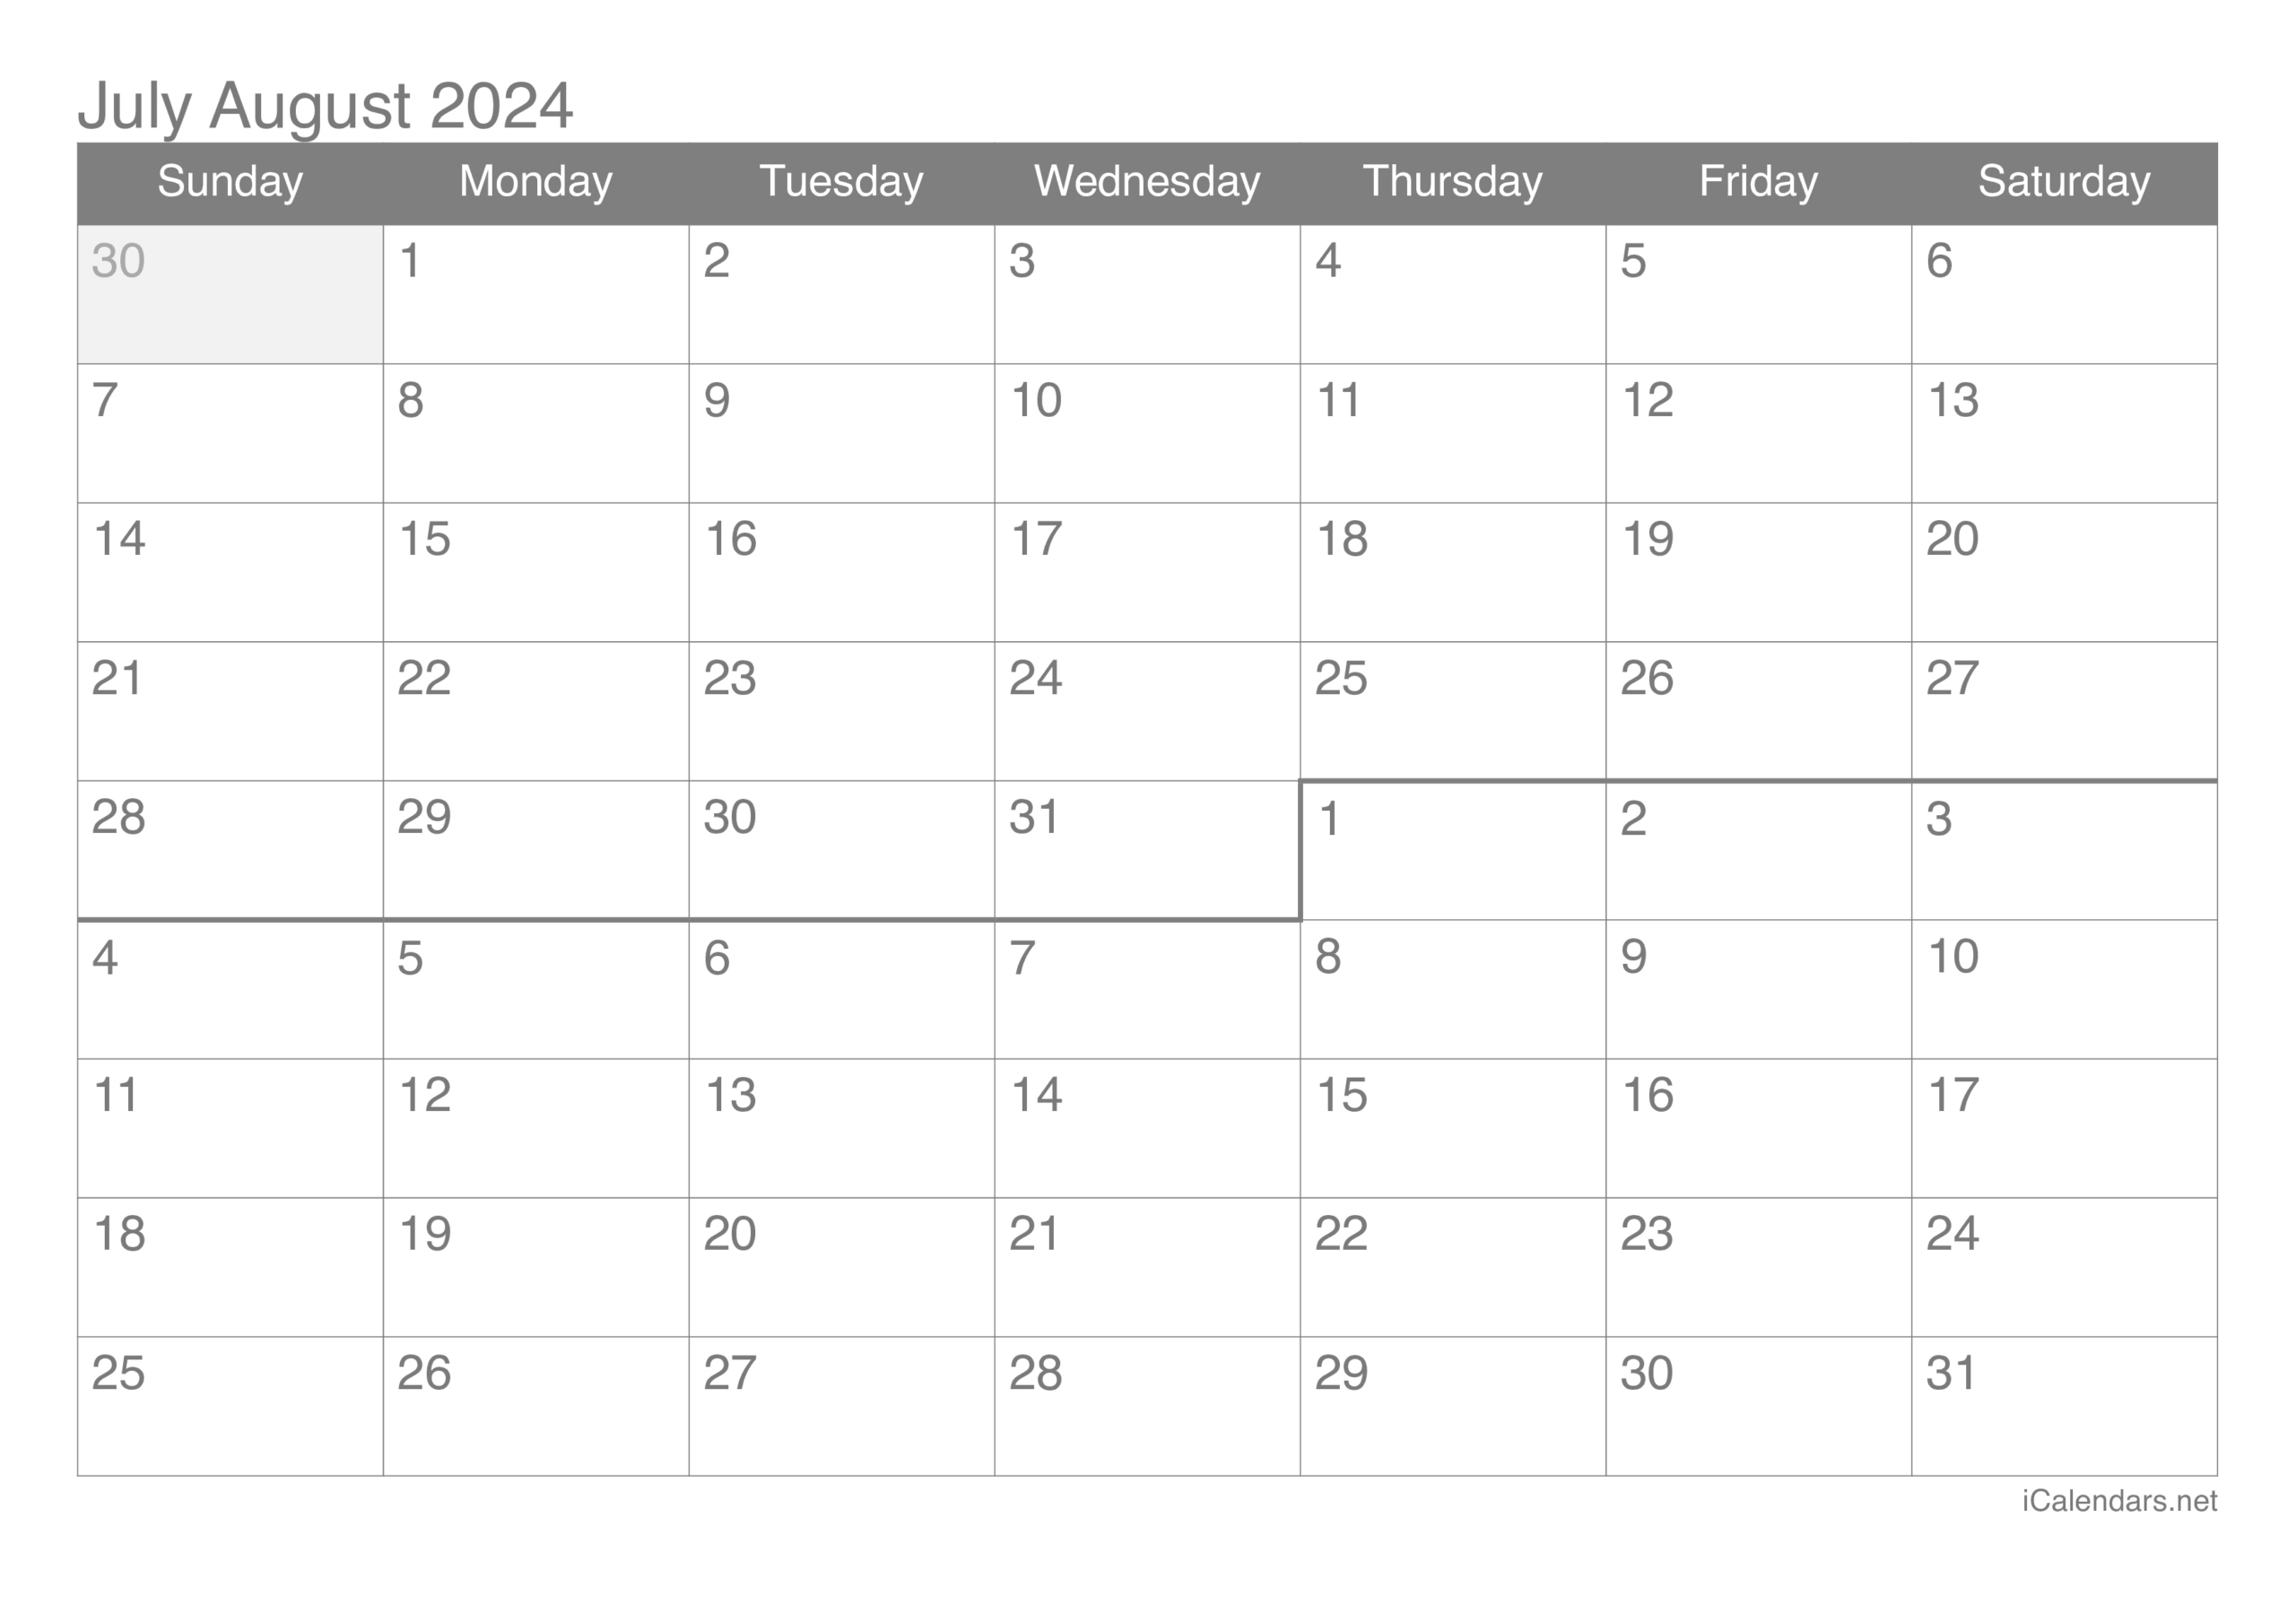 July And August 2024 Printable Calendar within Calendar June July Aug 2024